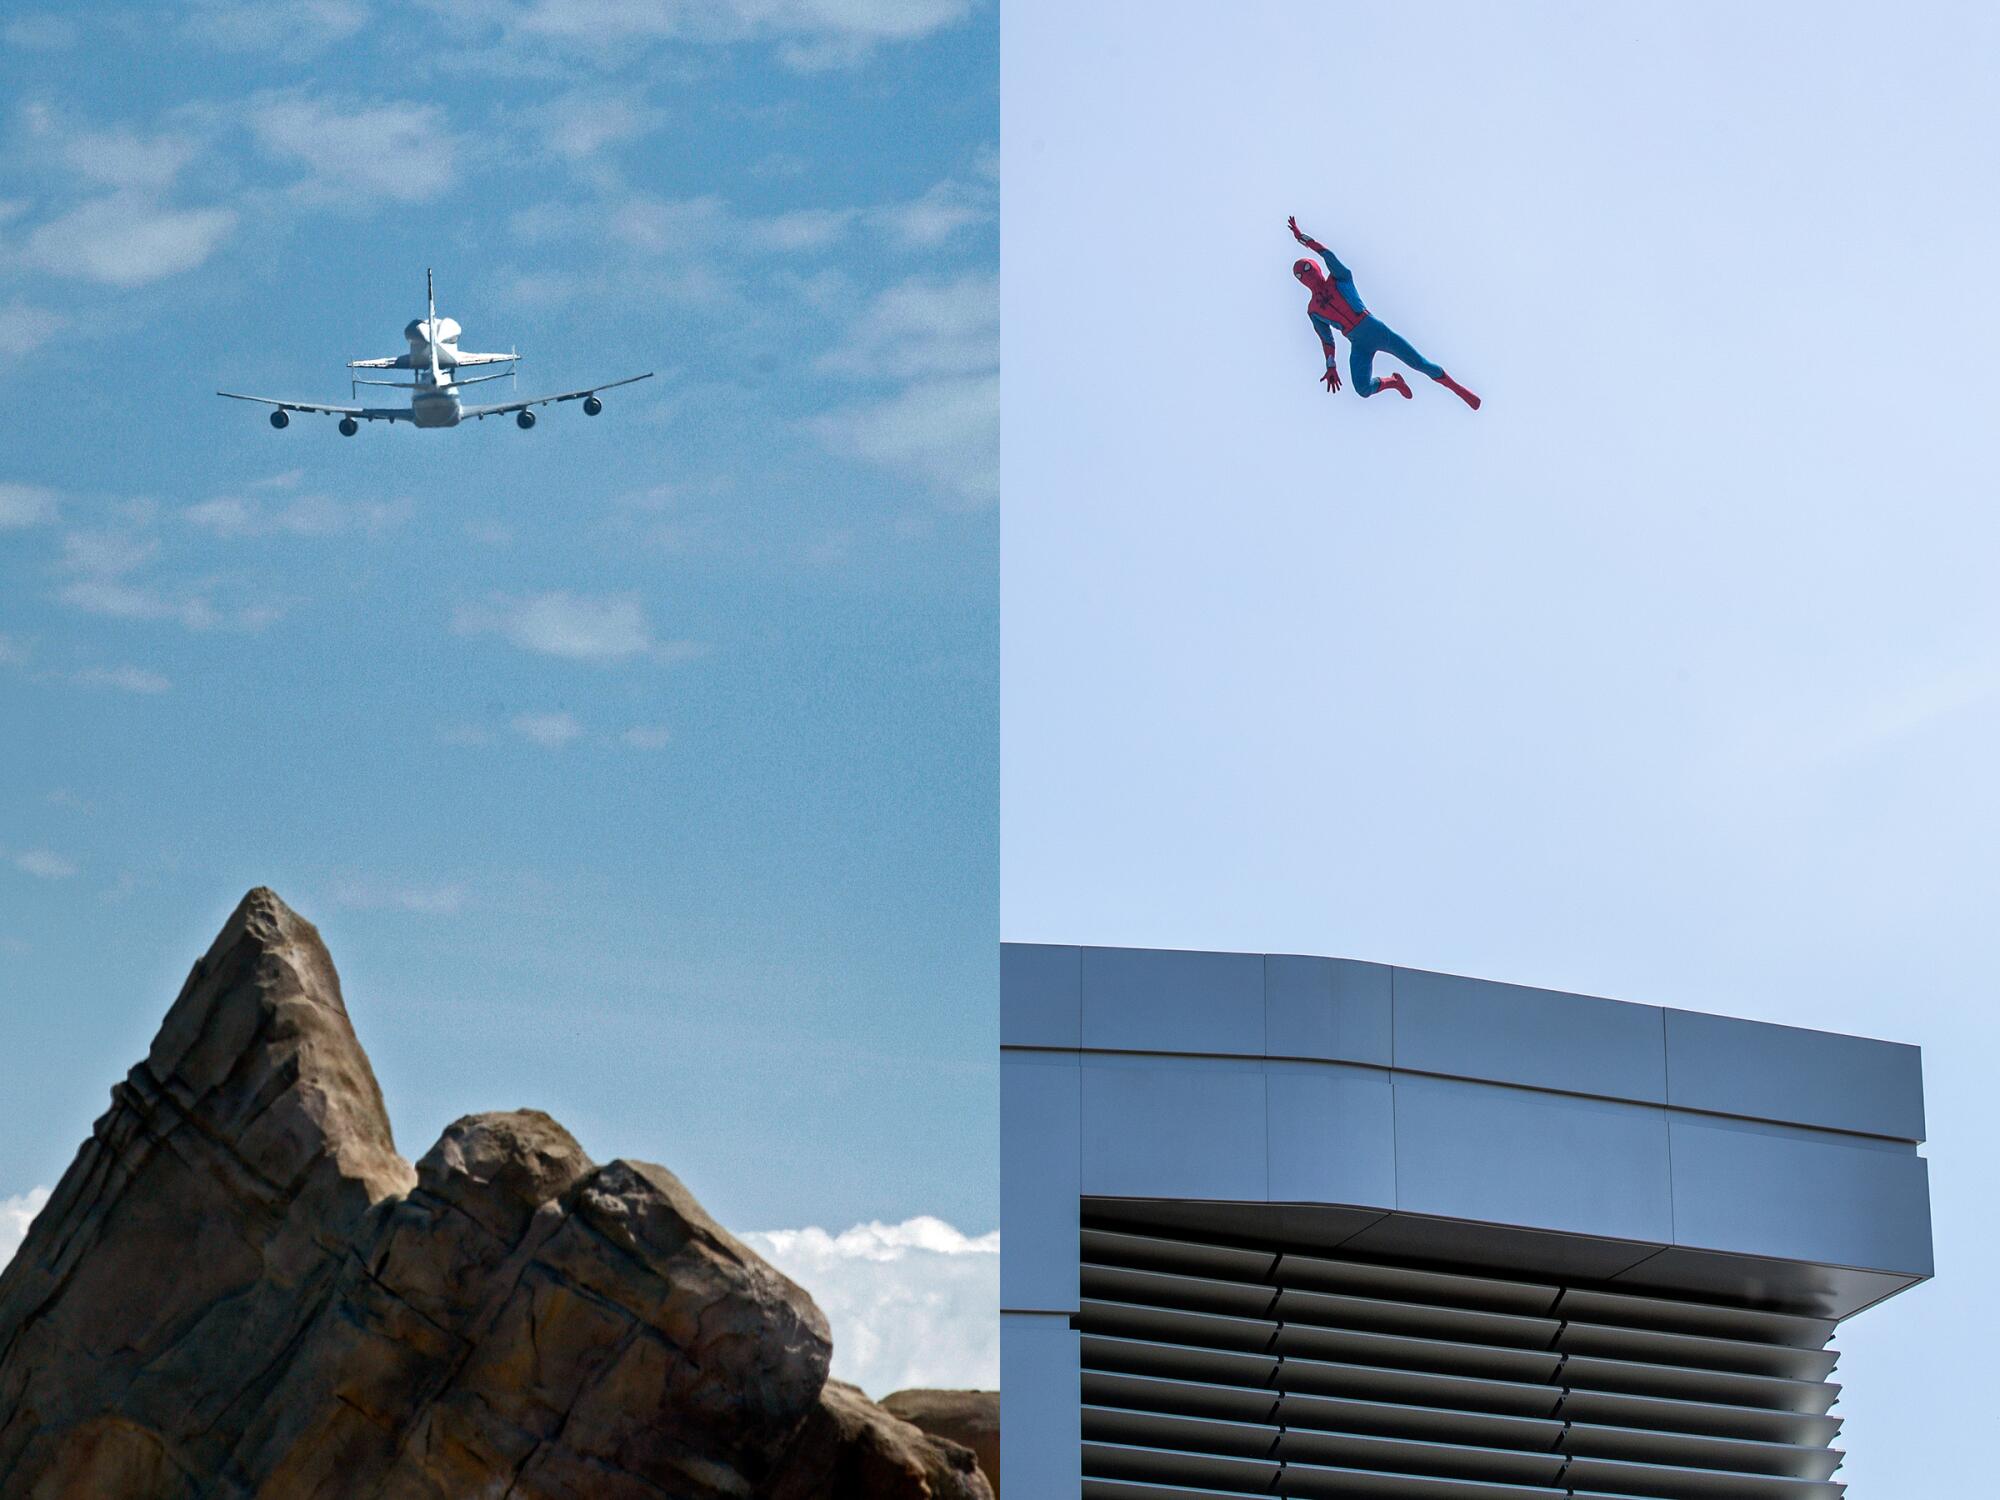 Two photos side by side showing Endeavour flying over Disneyland, left, and Spiderman soaring over California Adventure.